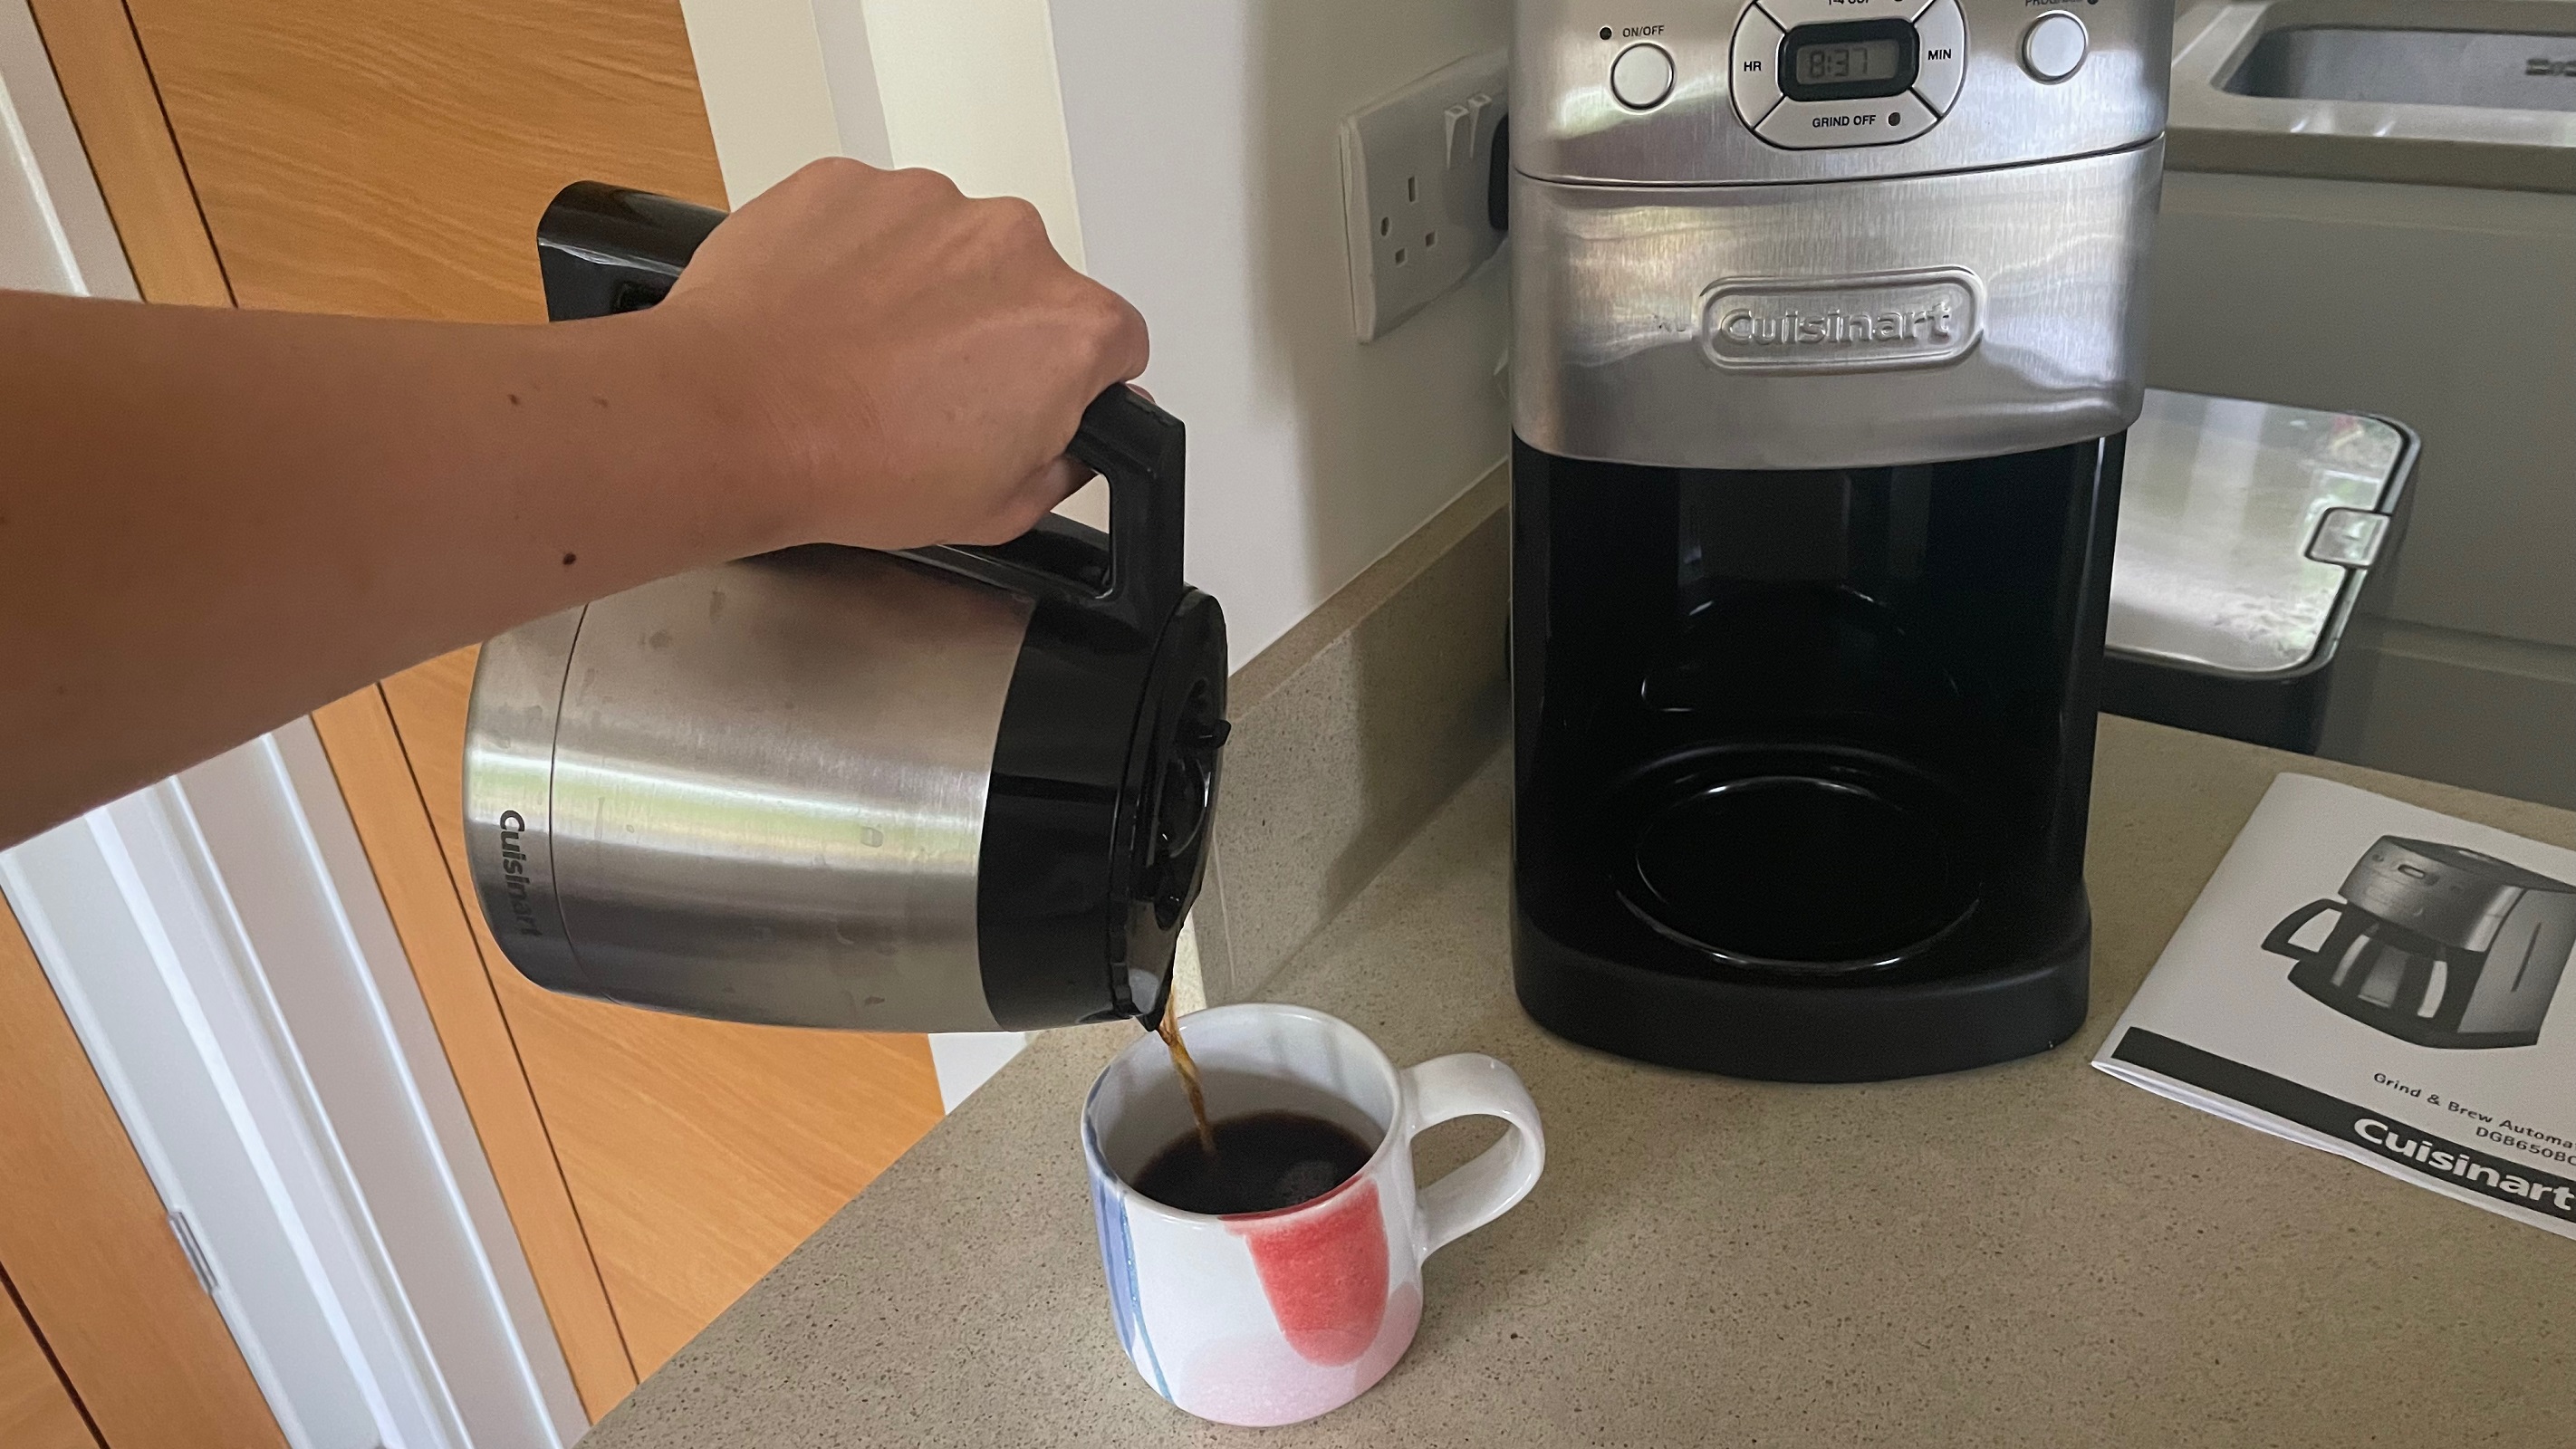 Pour the right amount of coffee from the jug of Cuisinart